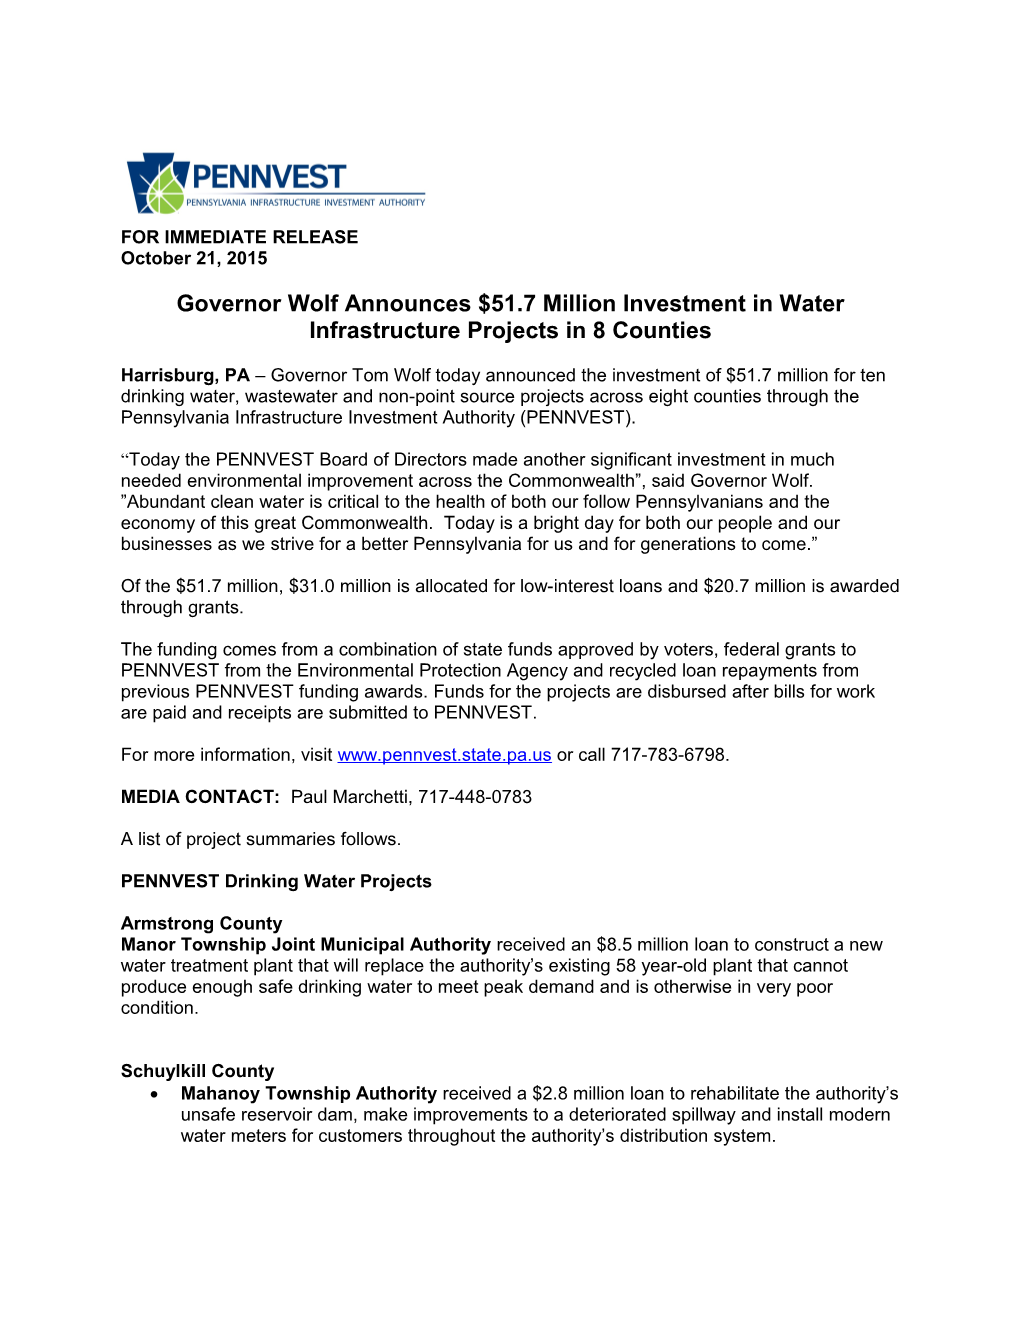 Governor Corbett Announces $84 Million Investment in Water Infrastructure Projects in 9 Counties